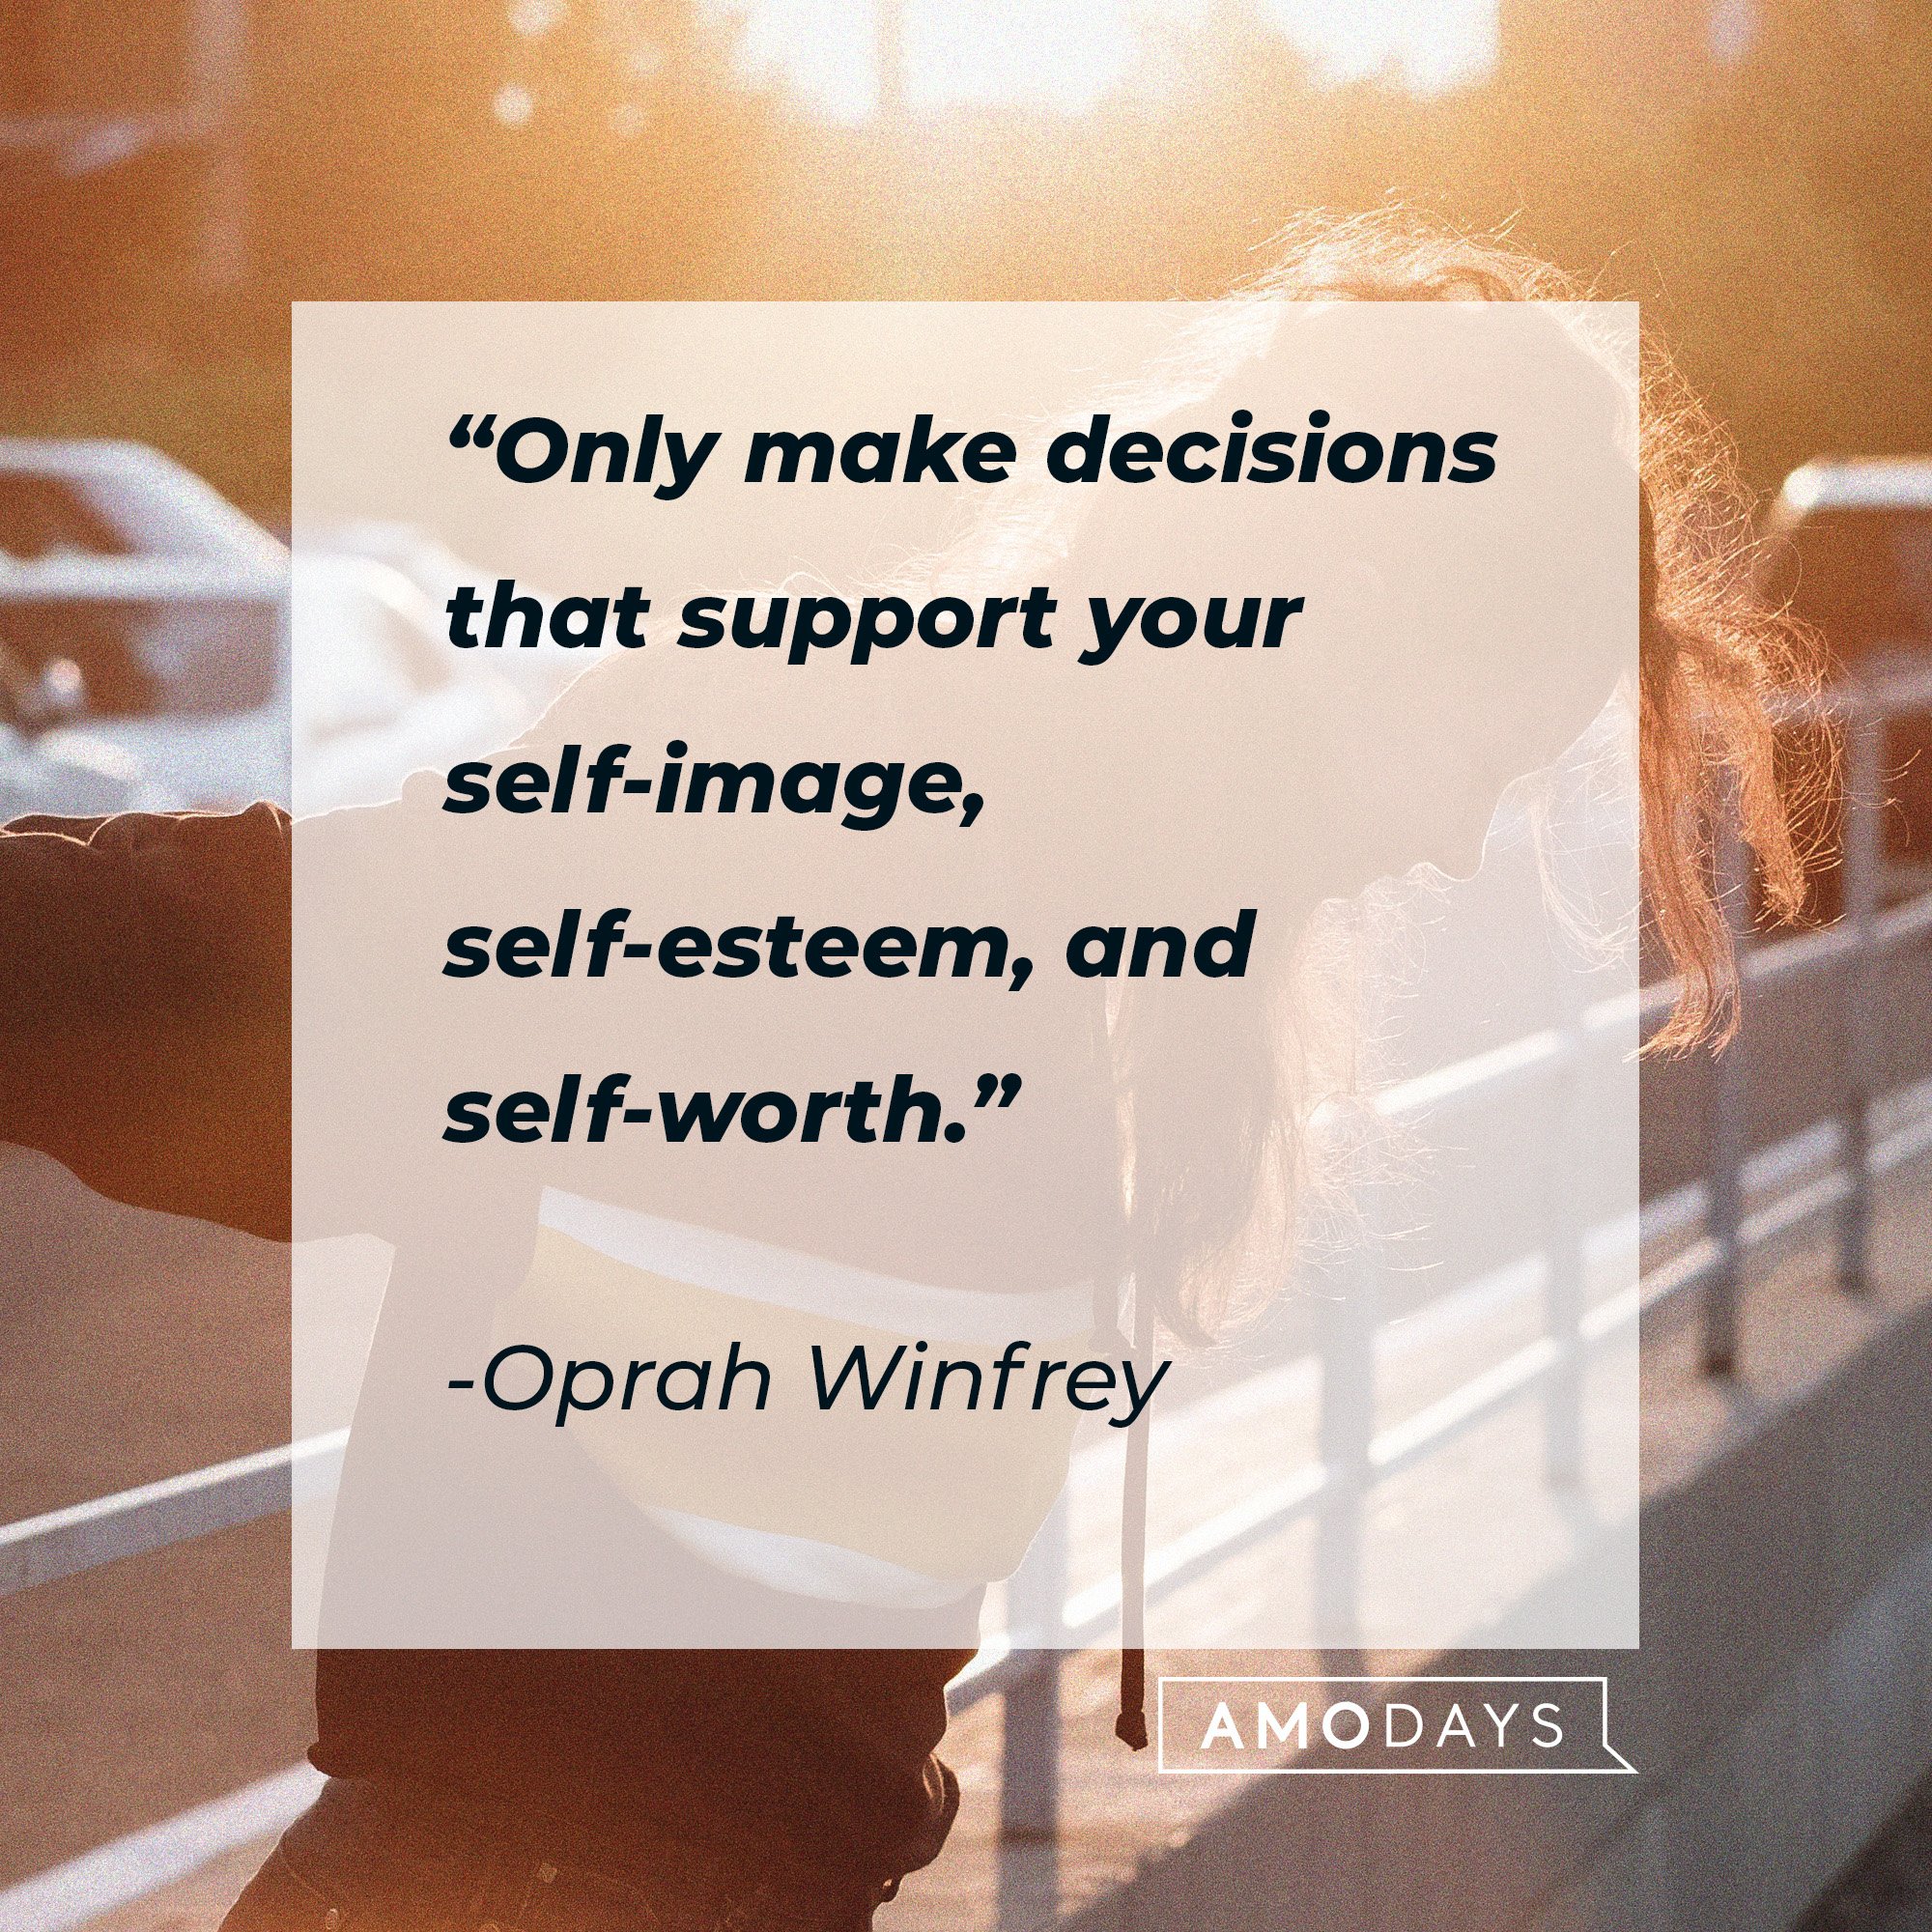  Oprah Winfrey's quote: “Only make decisions that support your self-image, self-esteem, and self-worth.” | Image: AmoDays